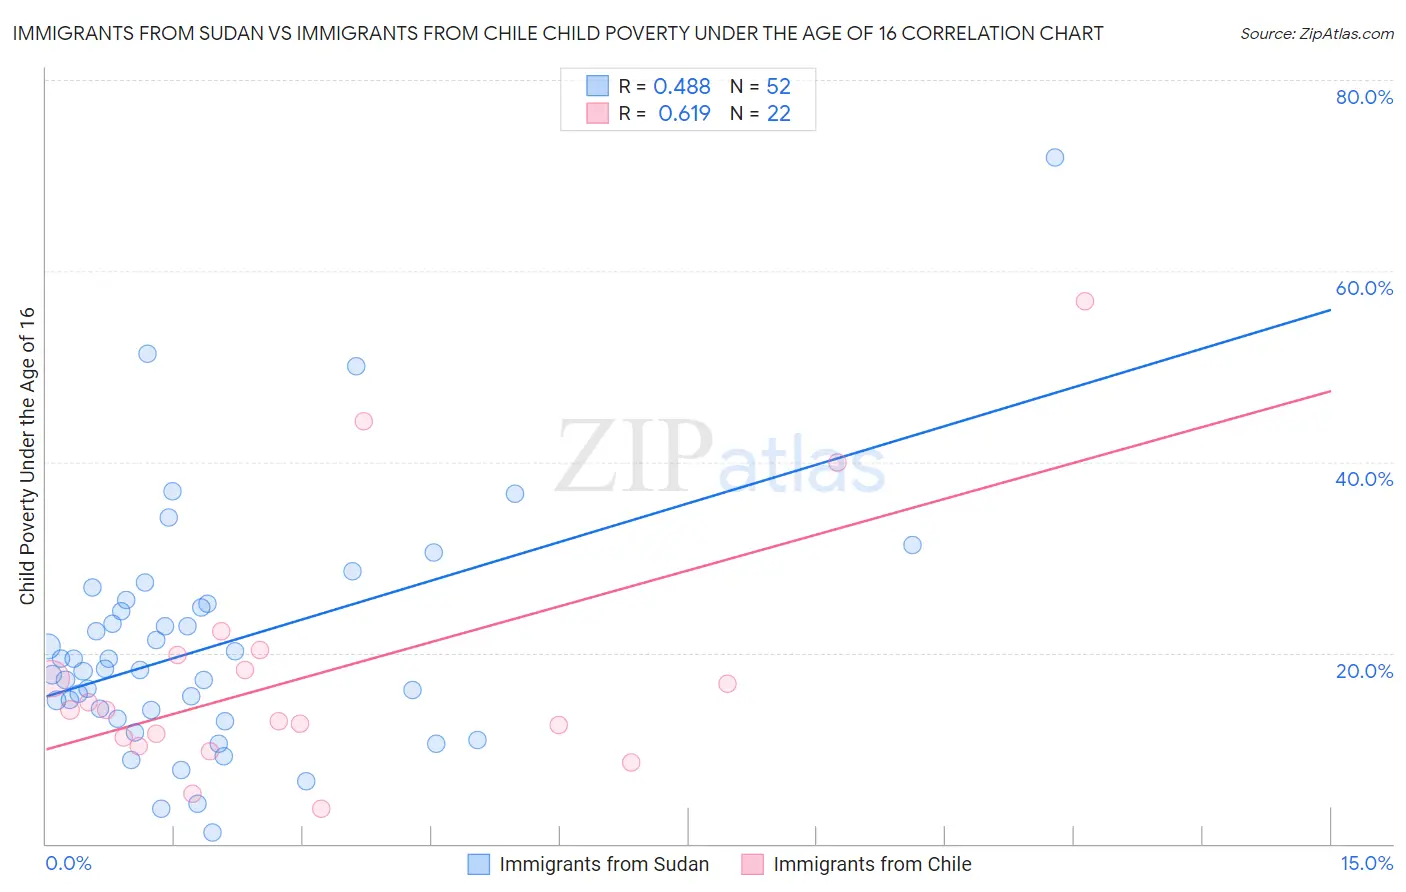 Immigrants from Sudan vs Immigrants from Chile Child Poverty Under the Age of 16